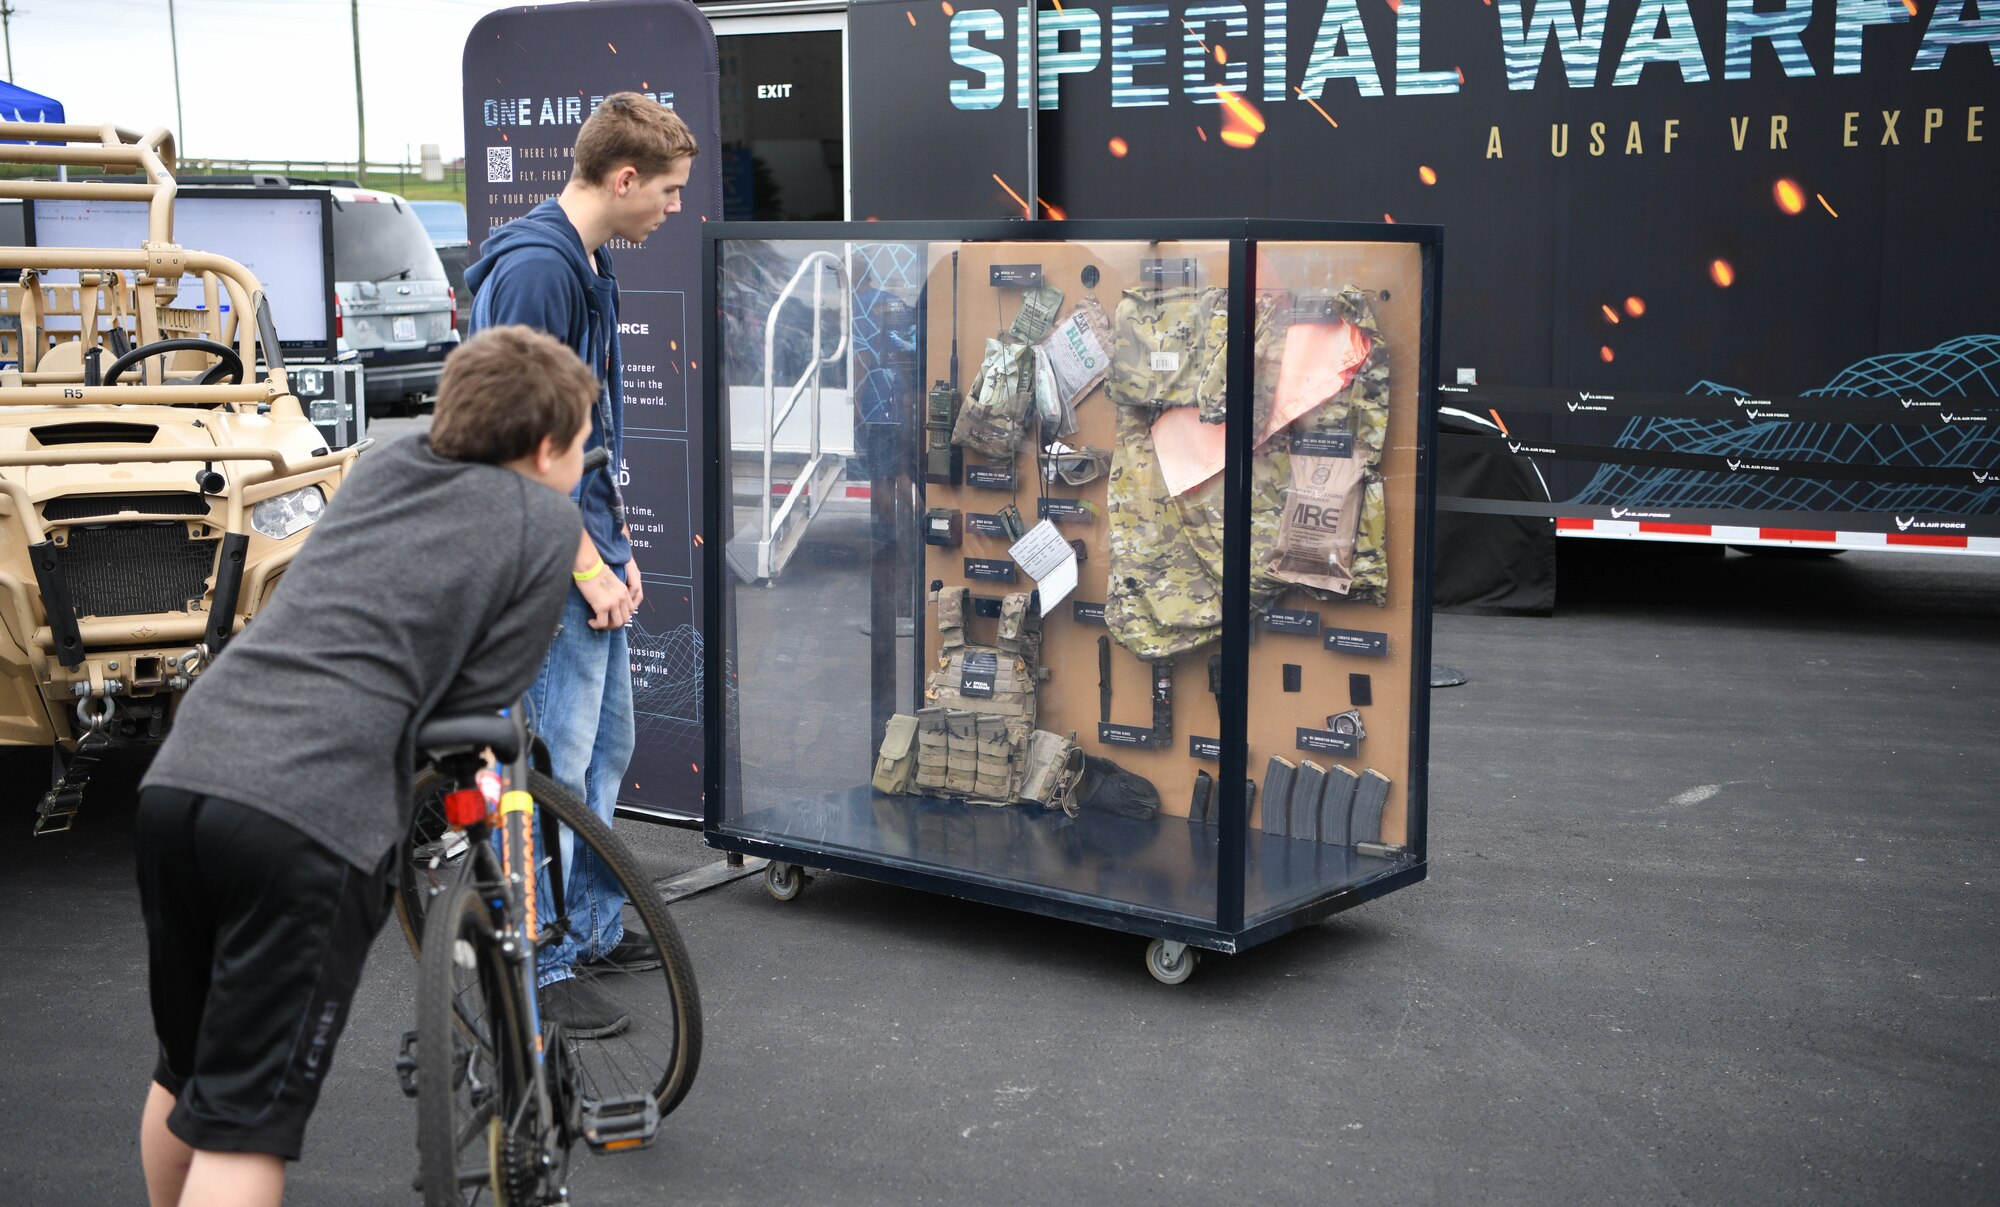 Passersby examine a display case outside of Charlotte Motor Speedway in Conway, North Carolina, which featured tactical equipment similar to what Special Warfare Airmen might use.